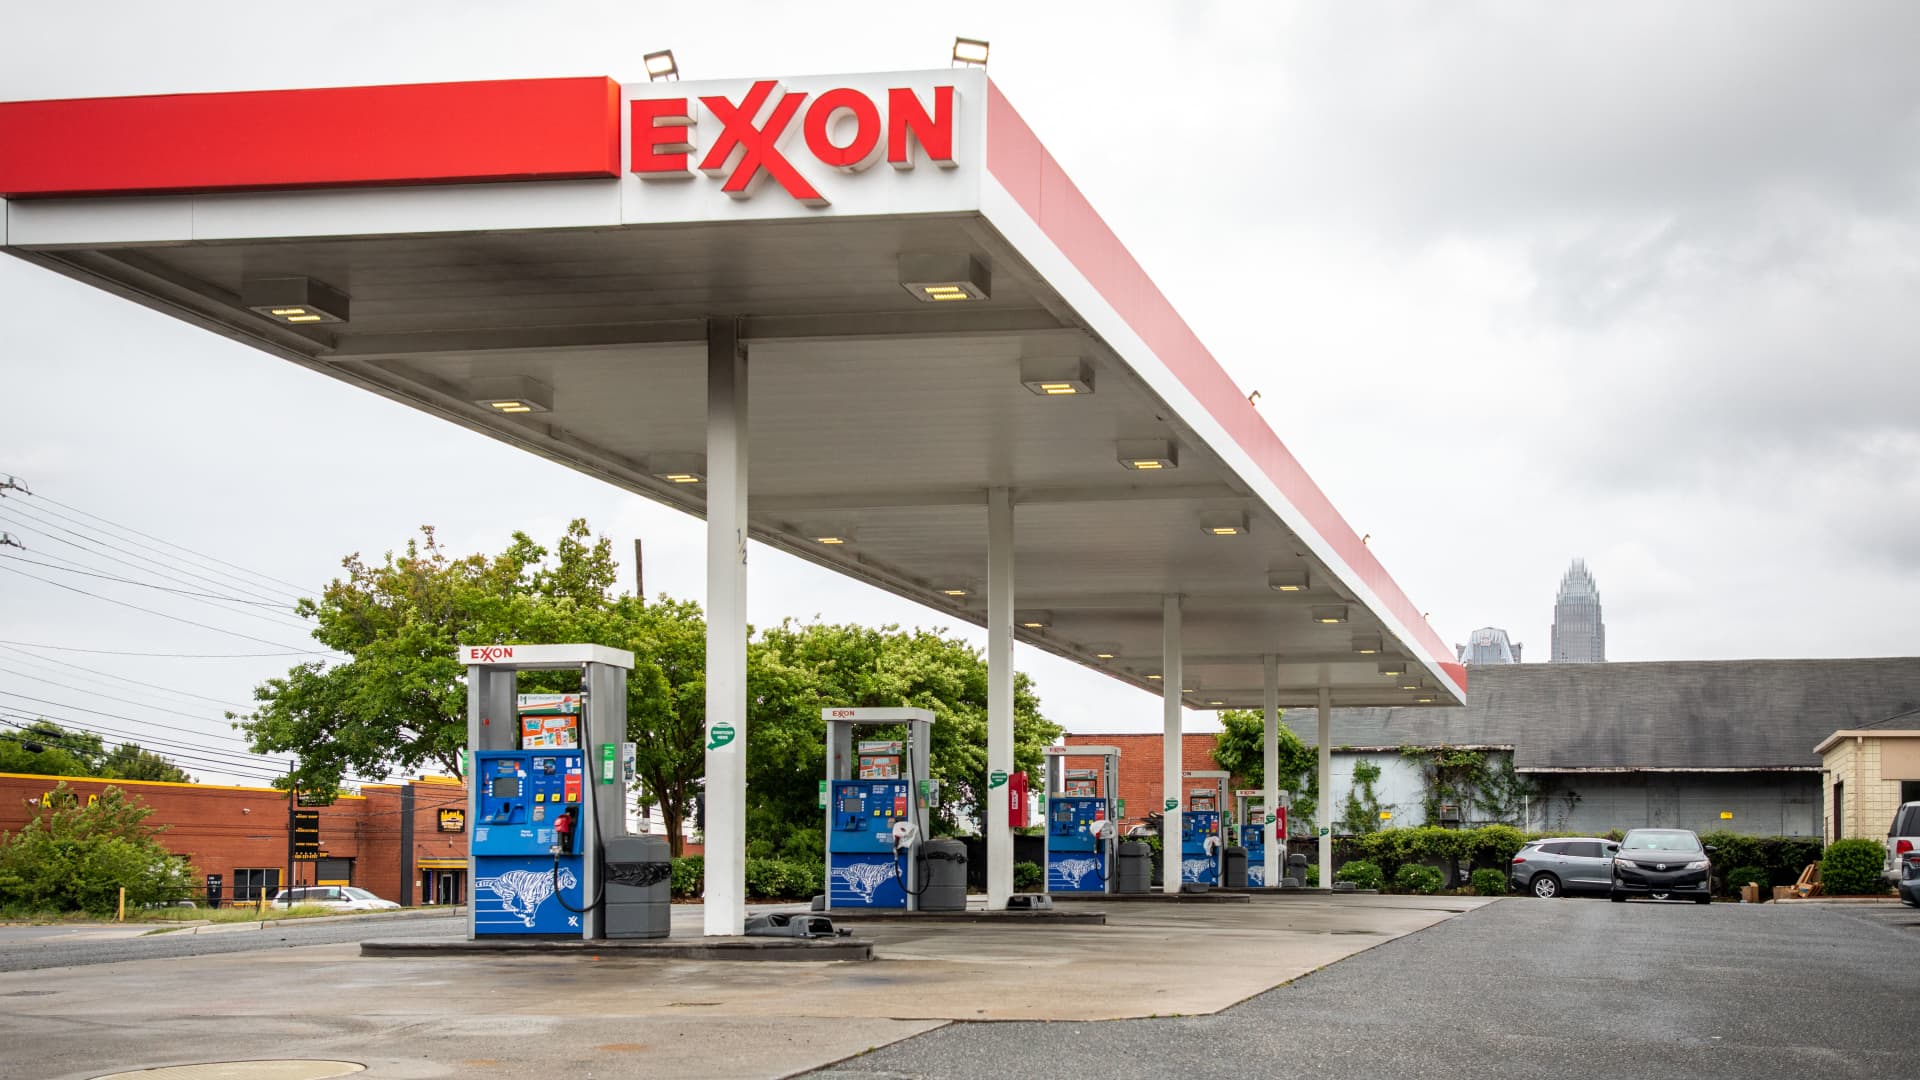 Stocks making the biggest moves midday: Exxon Mobil, Alphabet, Kellogg, Charles Schwab and more